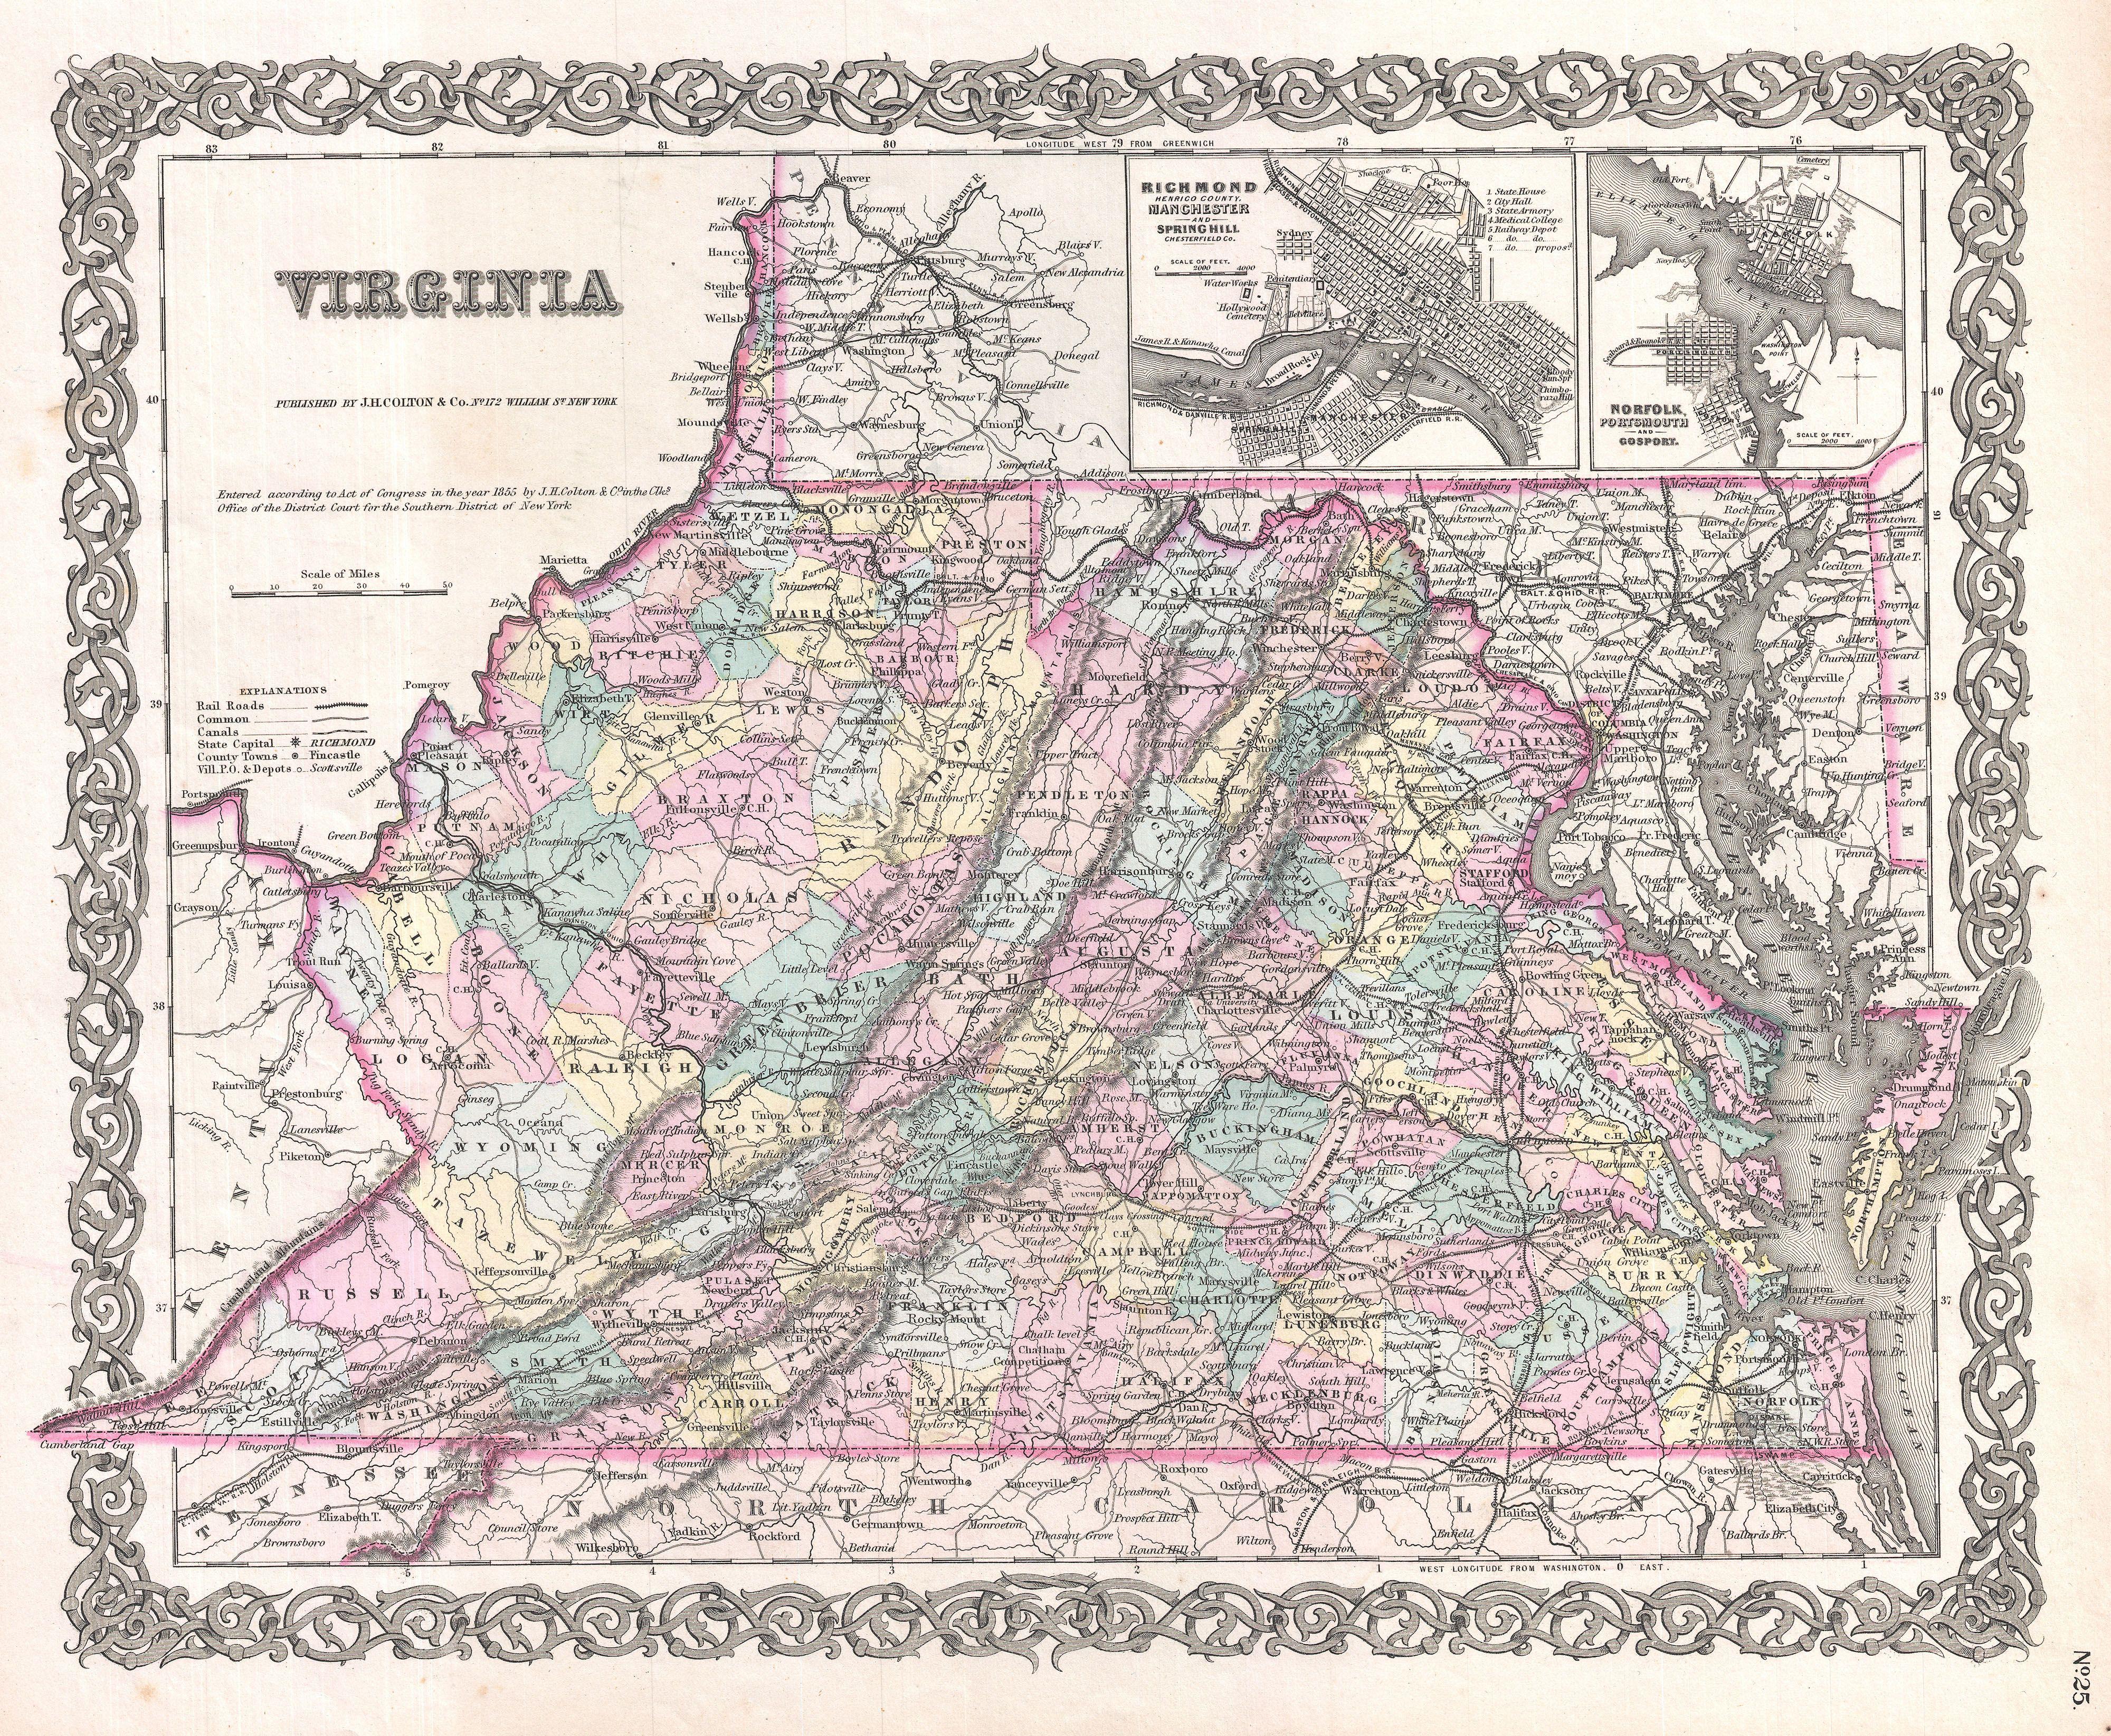 File:1855 Colton Map of Virginia  Geographicus  Virginiacolton1855.jpg  Wikimedia Commons